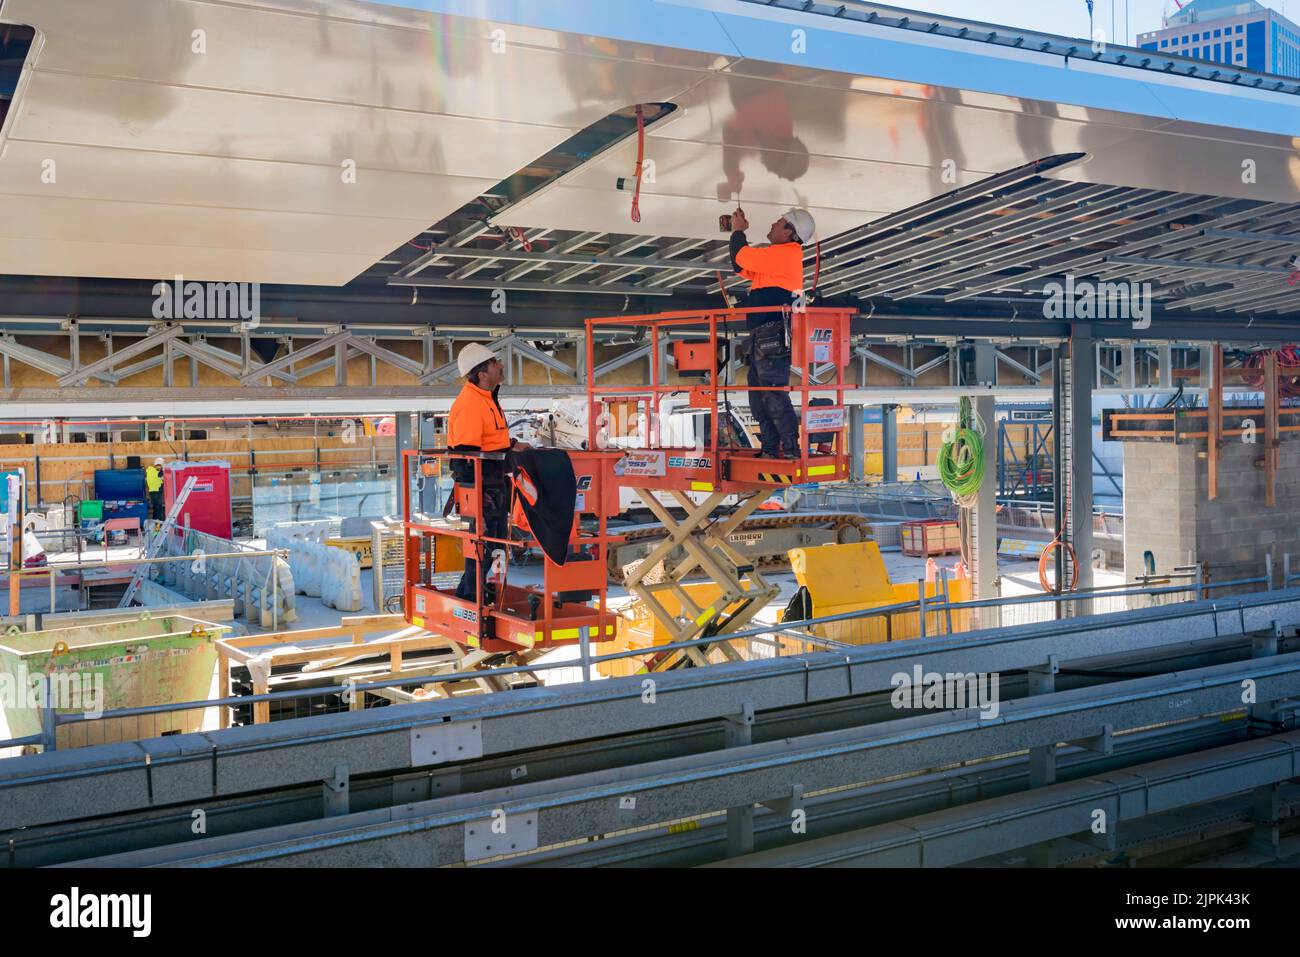 June 8th 2022: People working on the roof of the new Metro railway platforms at Central Station in Sydney, Australia in high visibility safety PPE. Stock Photo